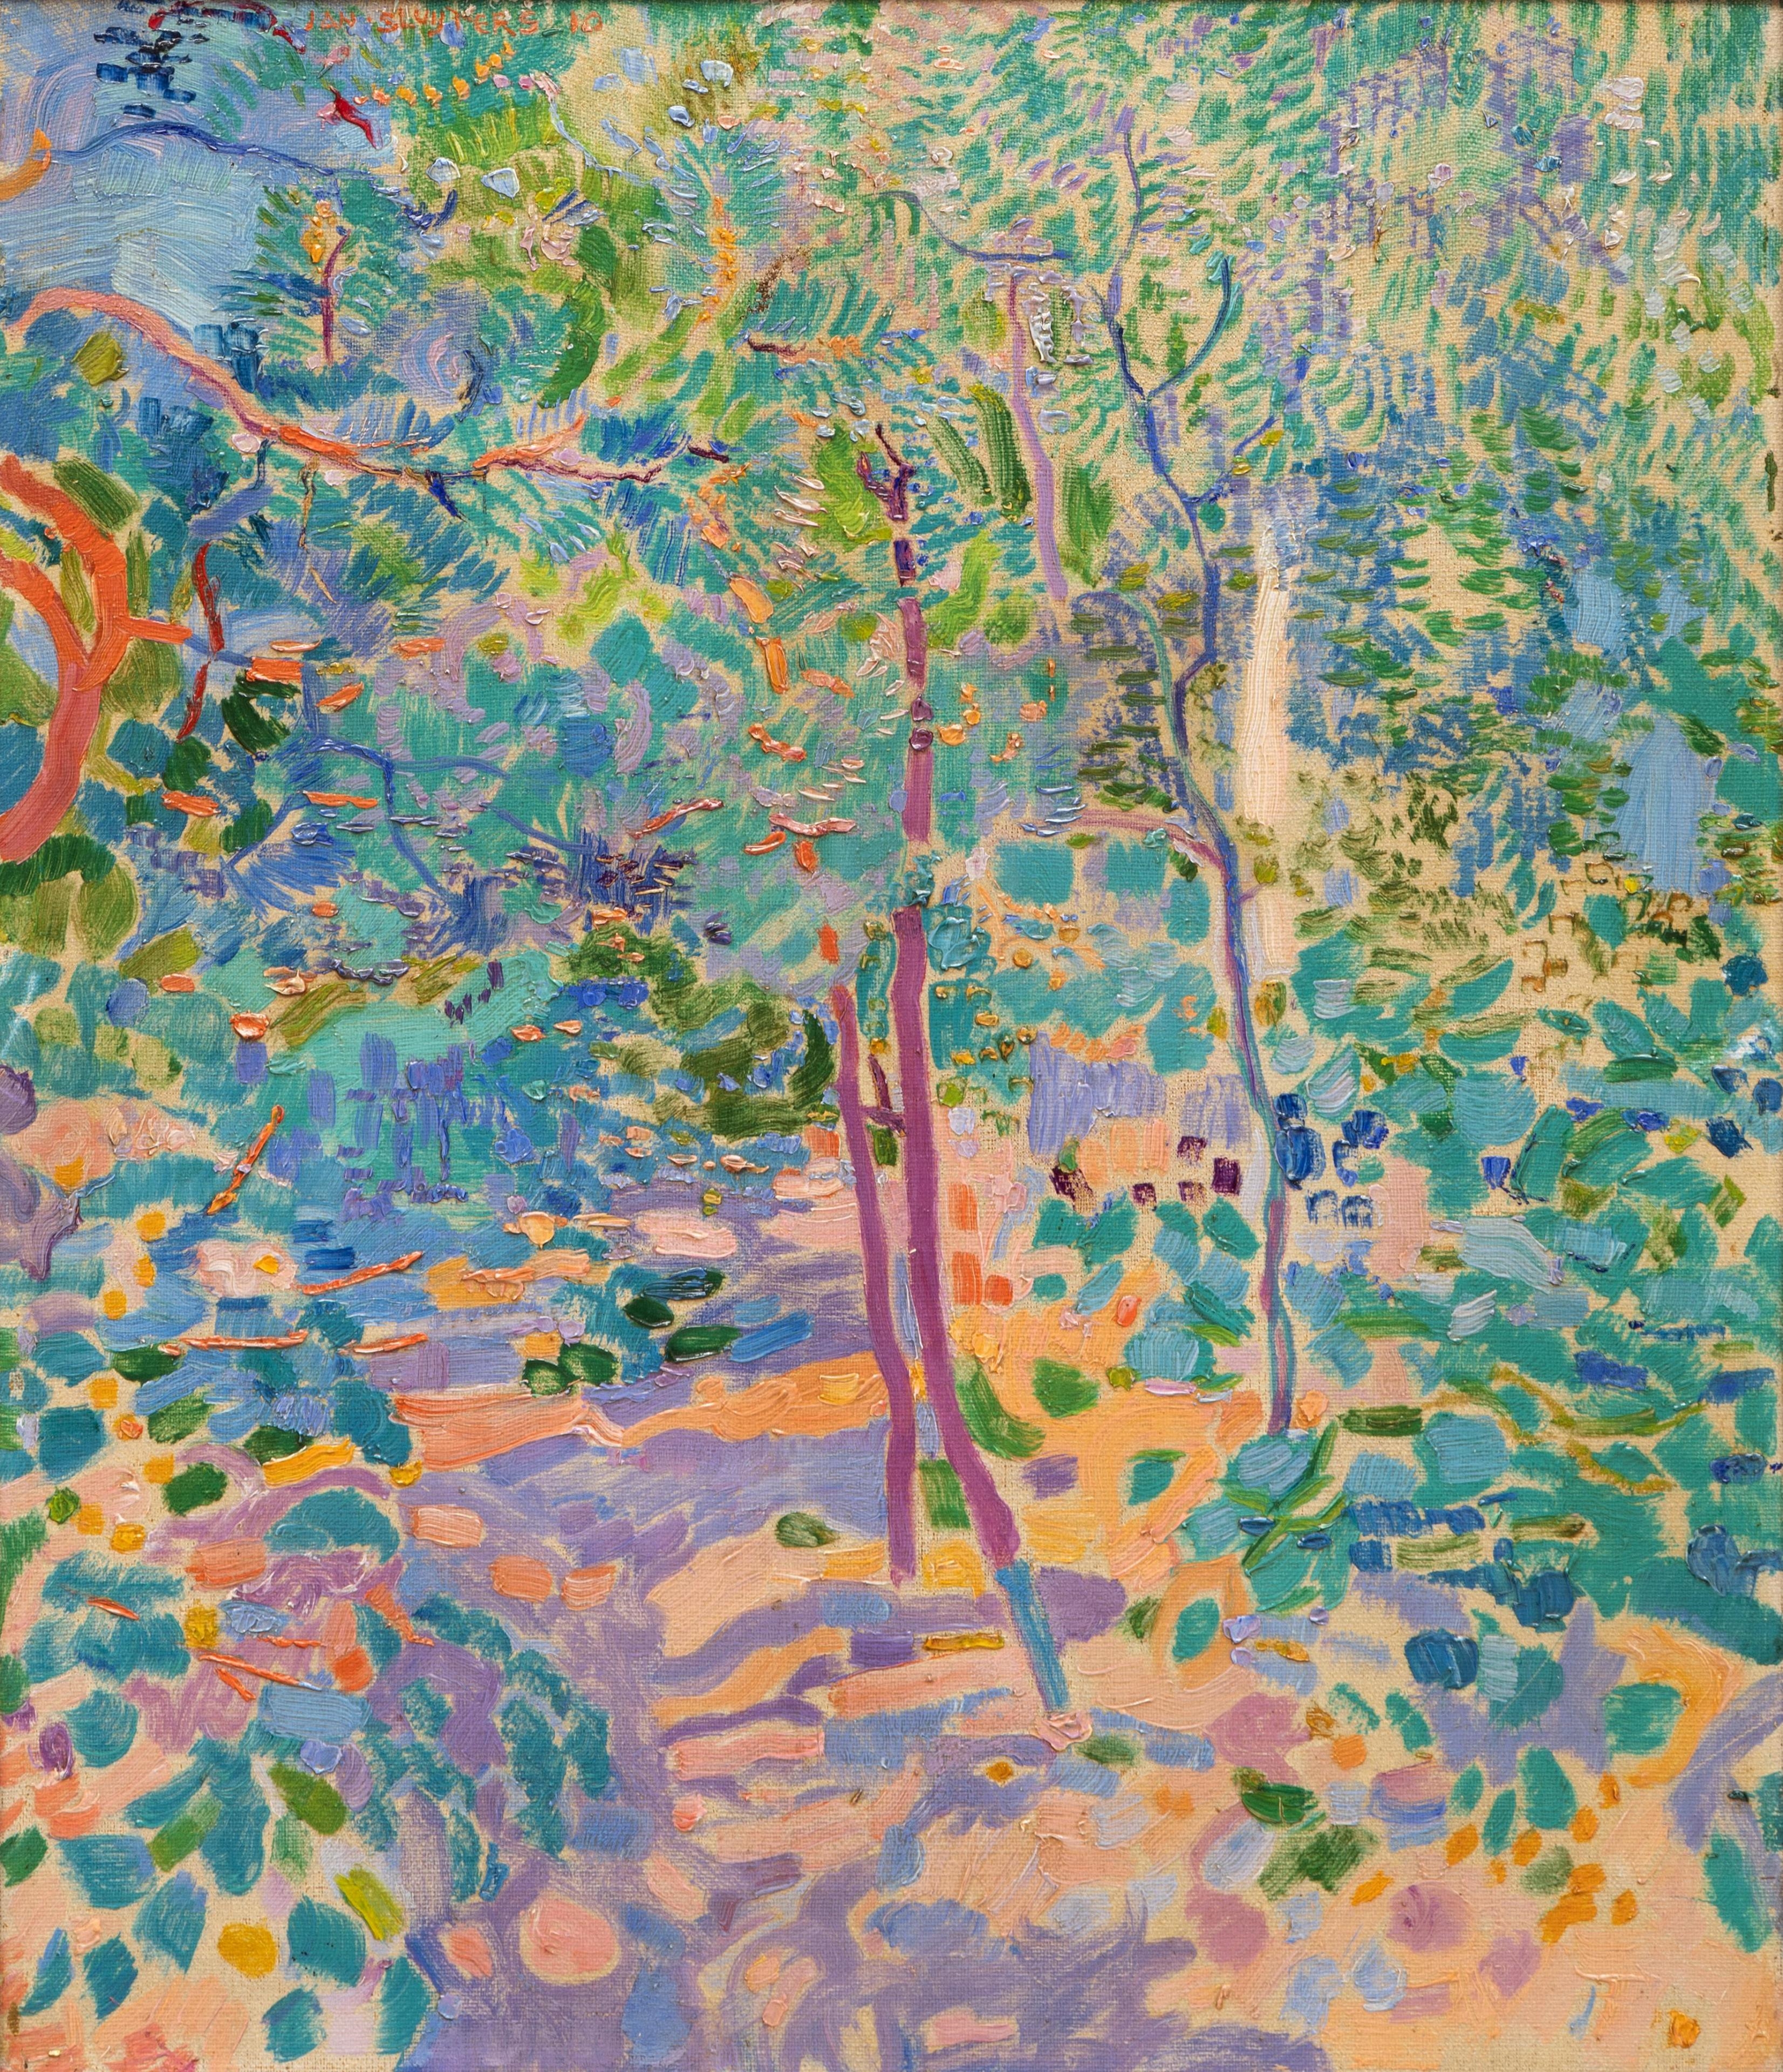 Artwork by Jan Sluijters, 'Laantje' / A colourful forest lane, Made of oil on canvas